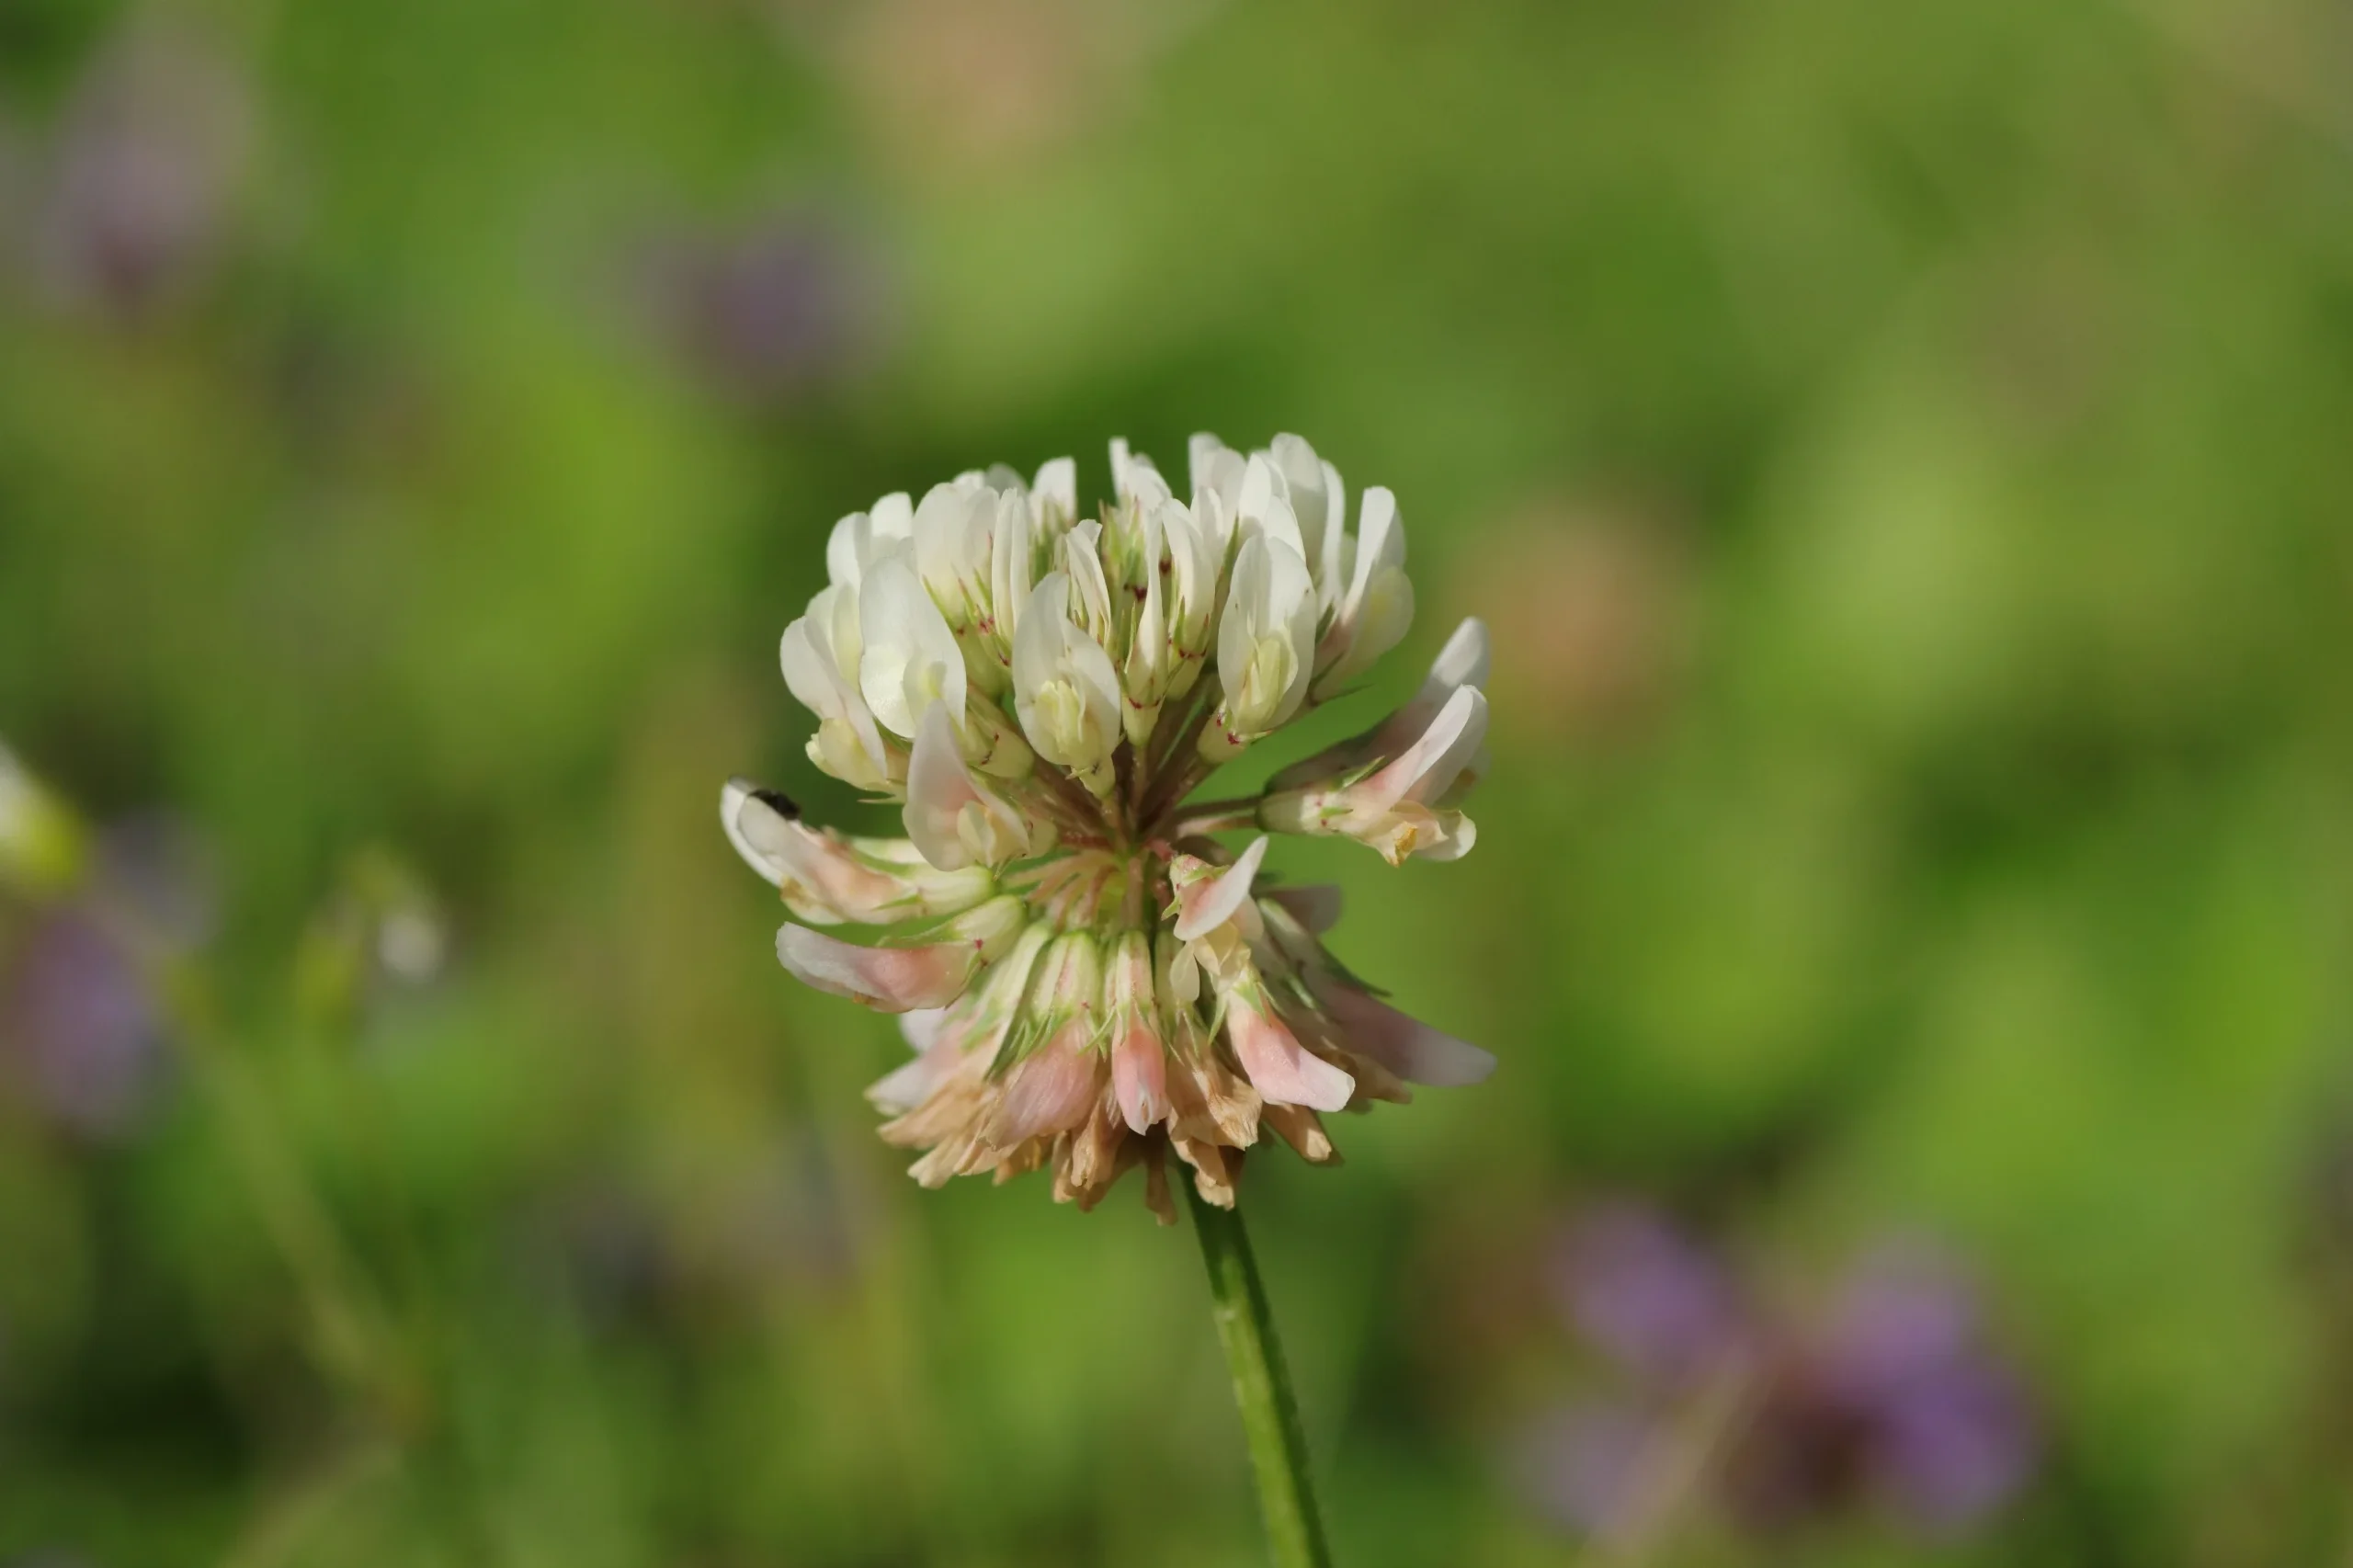 White clover - flower in detail. The individual, white flowers sit in a spherical shape at the end of a green stem